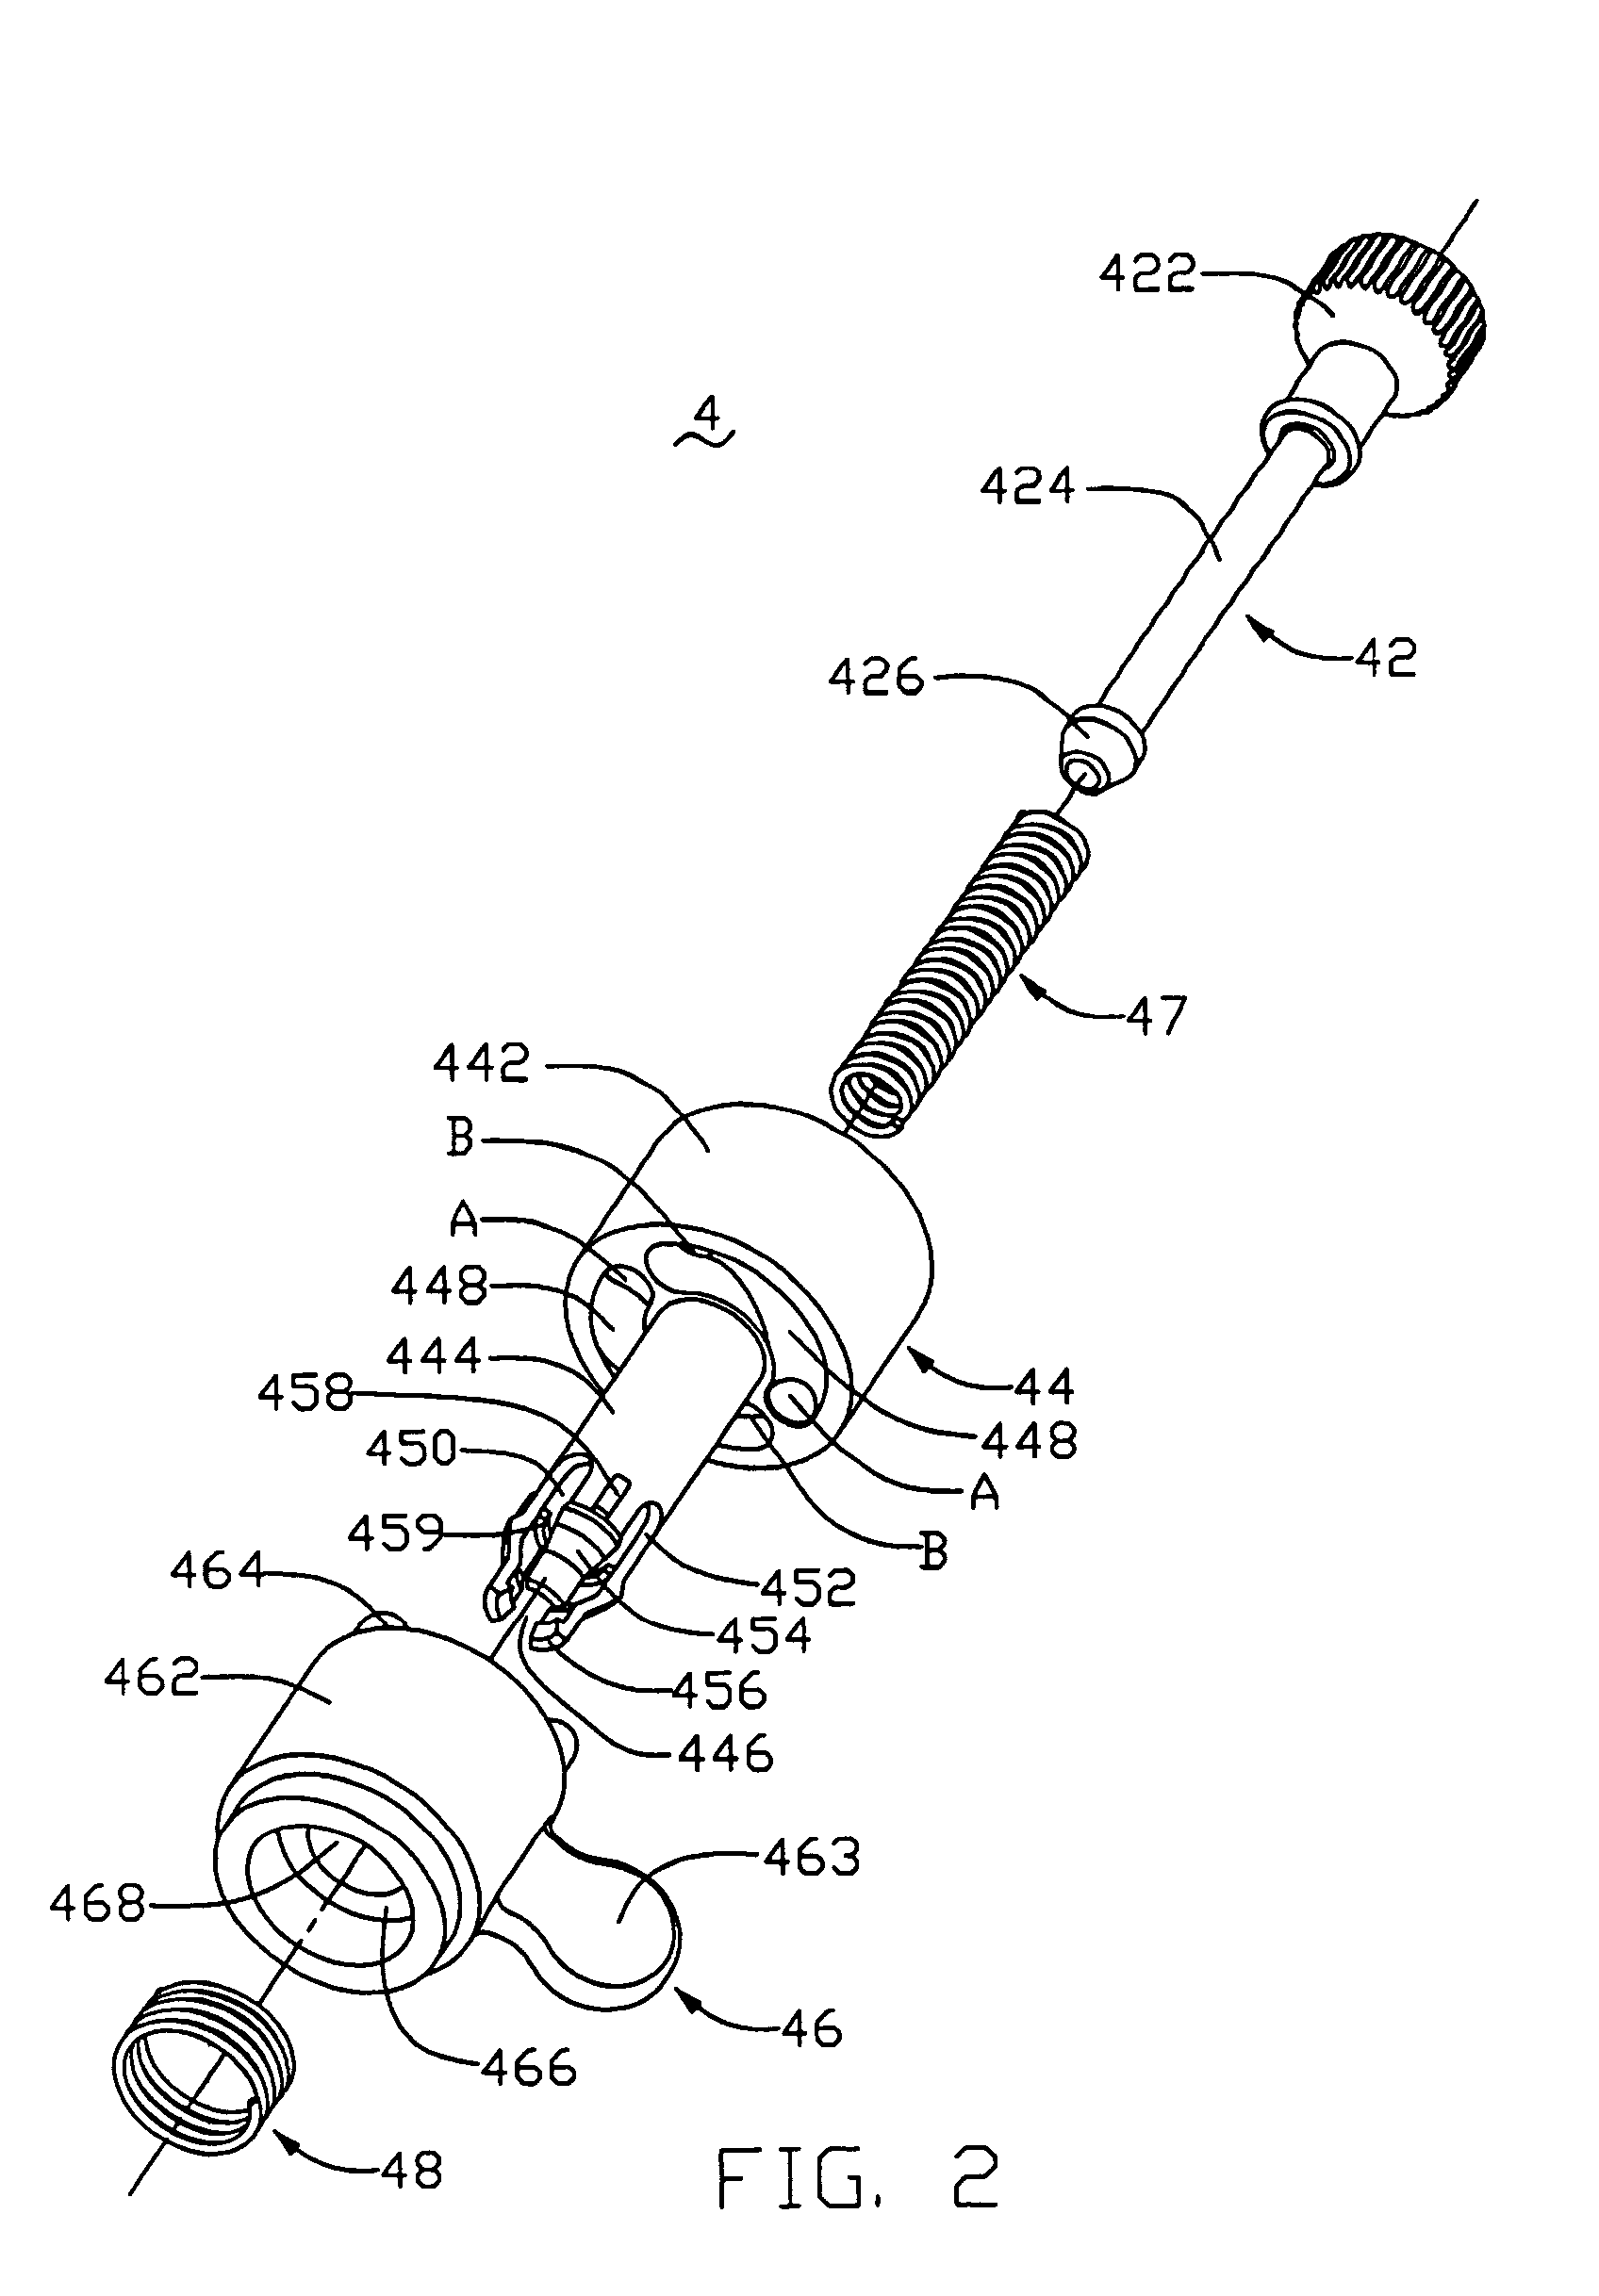 Locking device for heat dissipating device